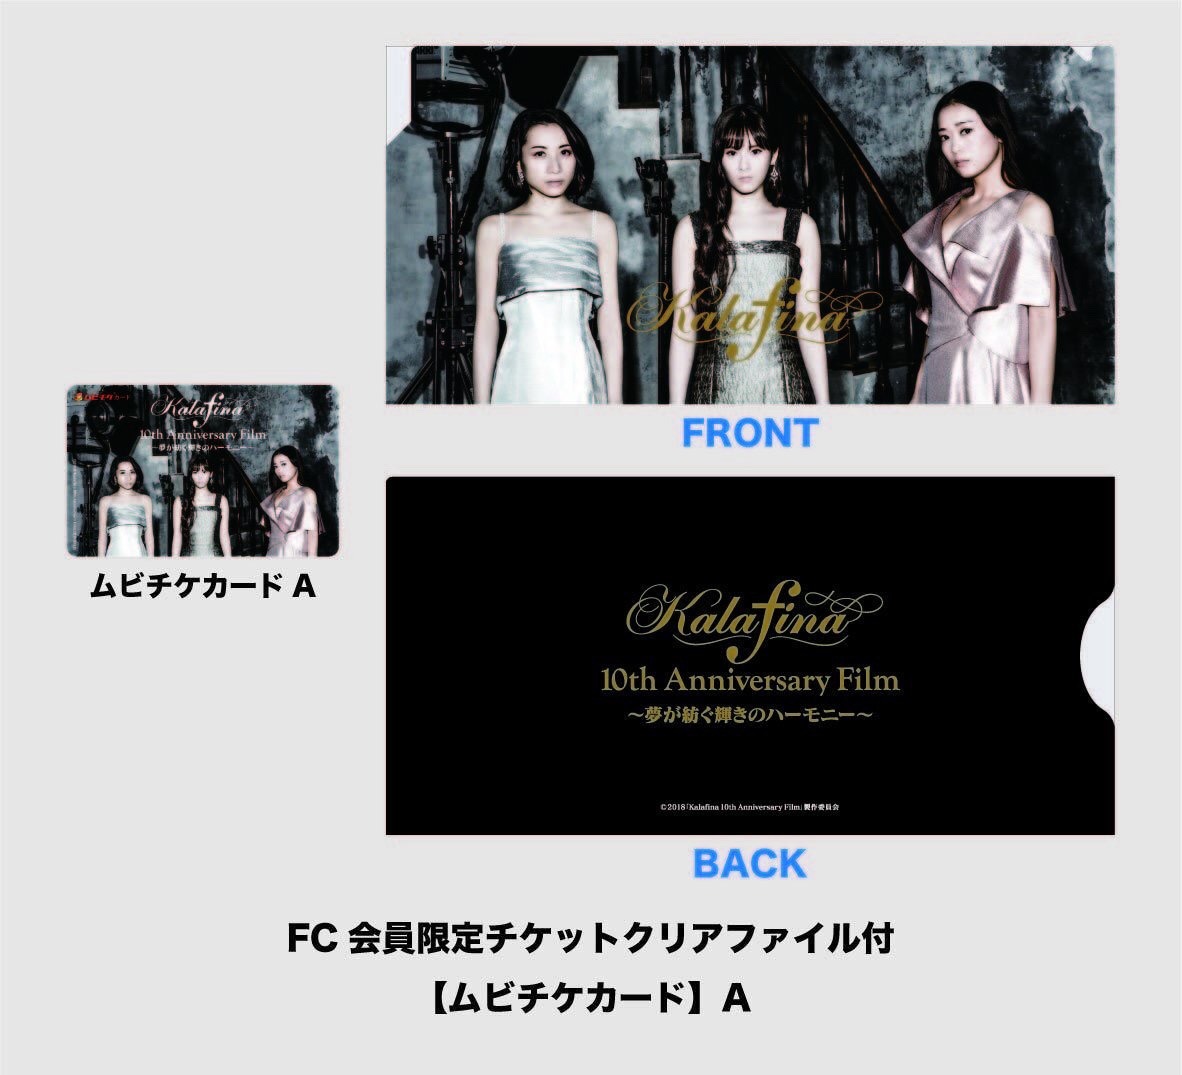 Everything Kalafina 10th Anniversary Film Movie Ticket Card And Ticket